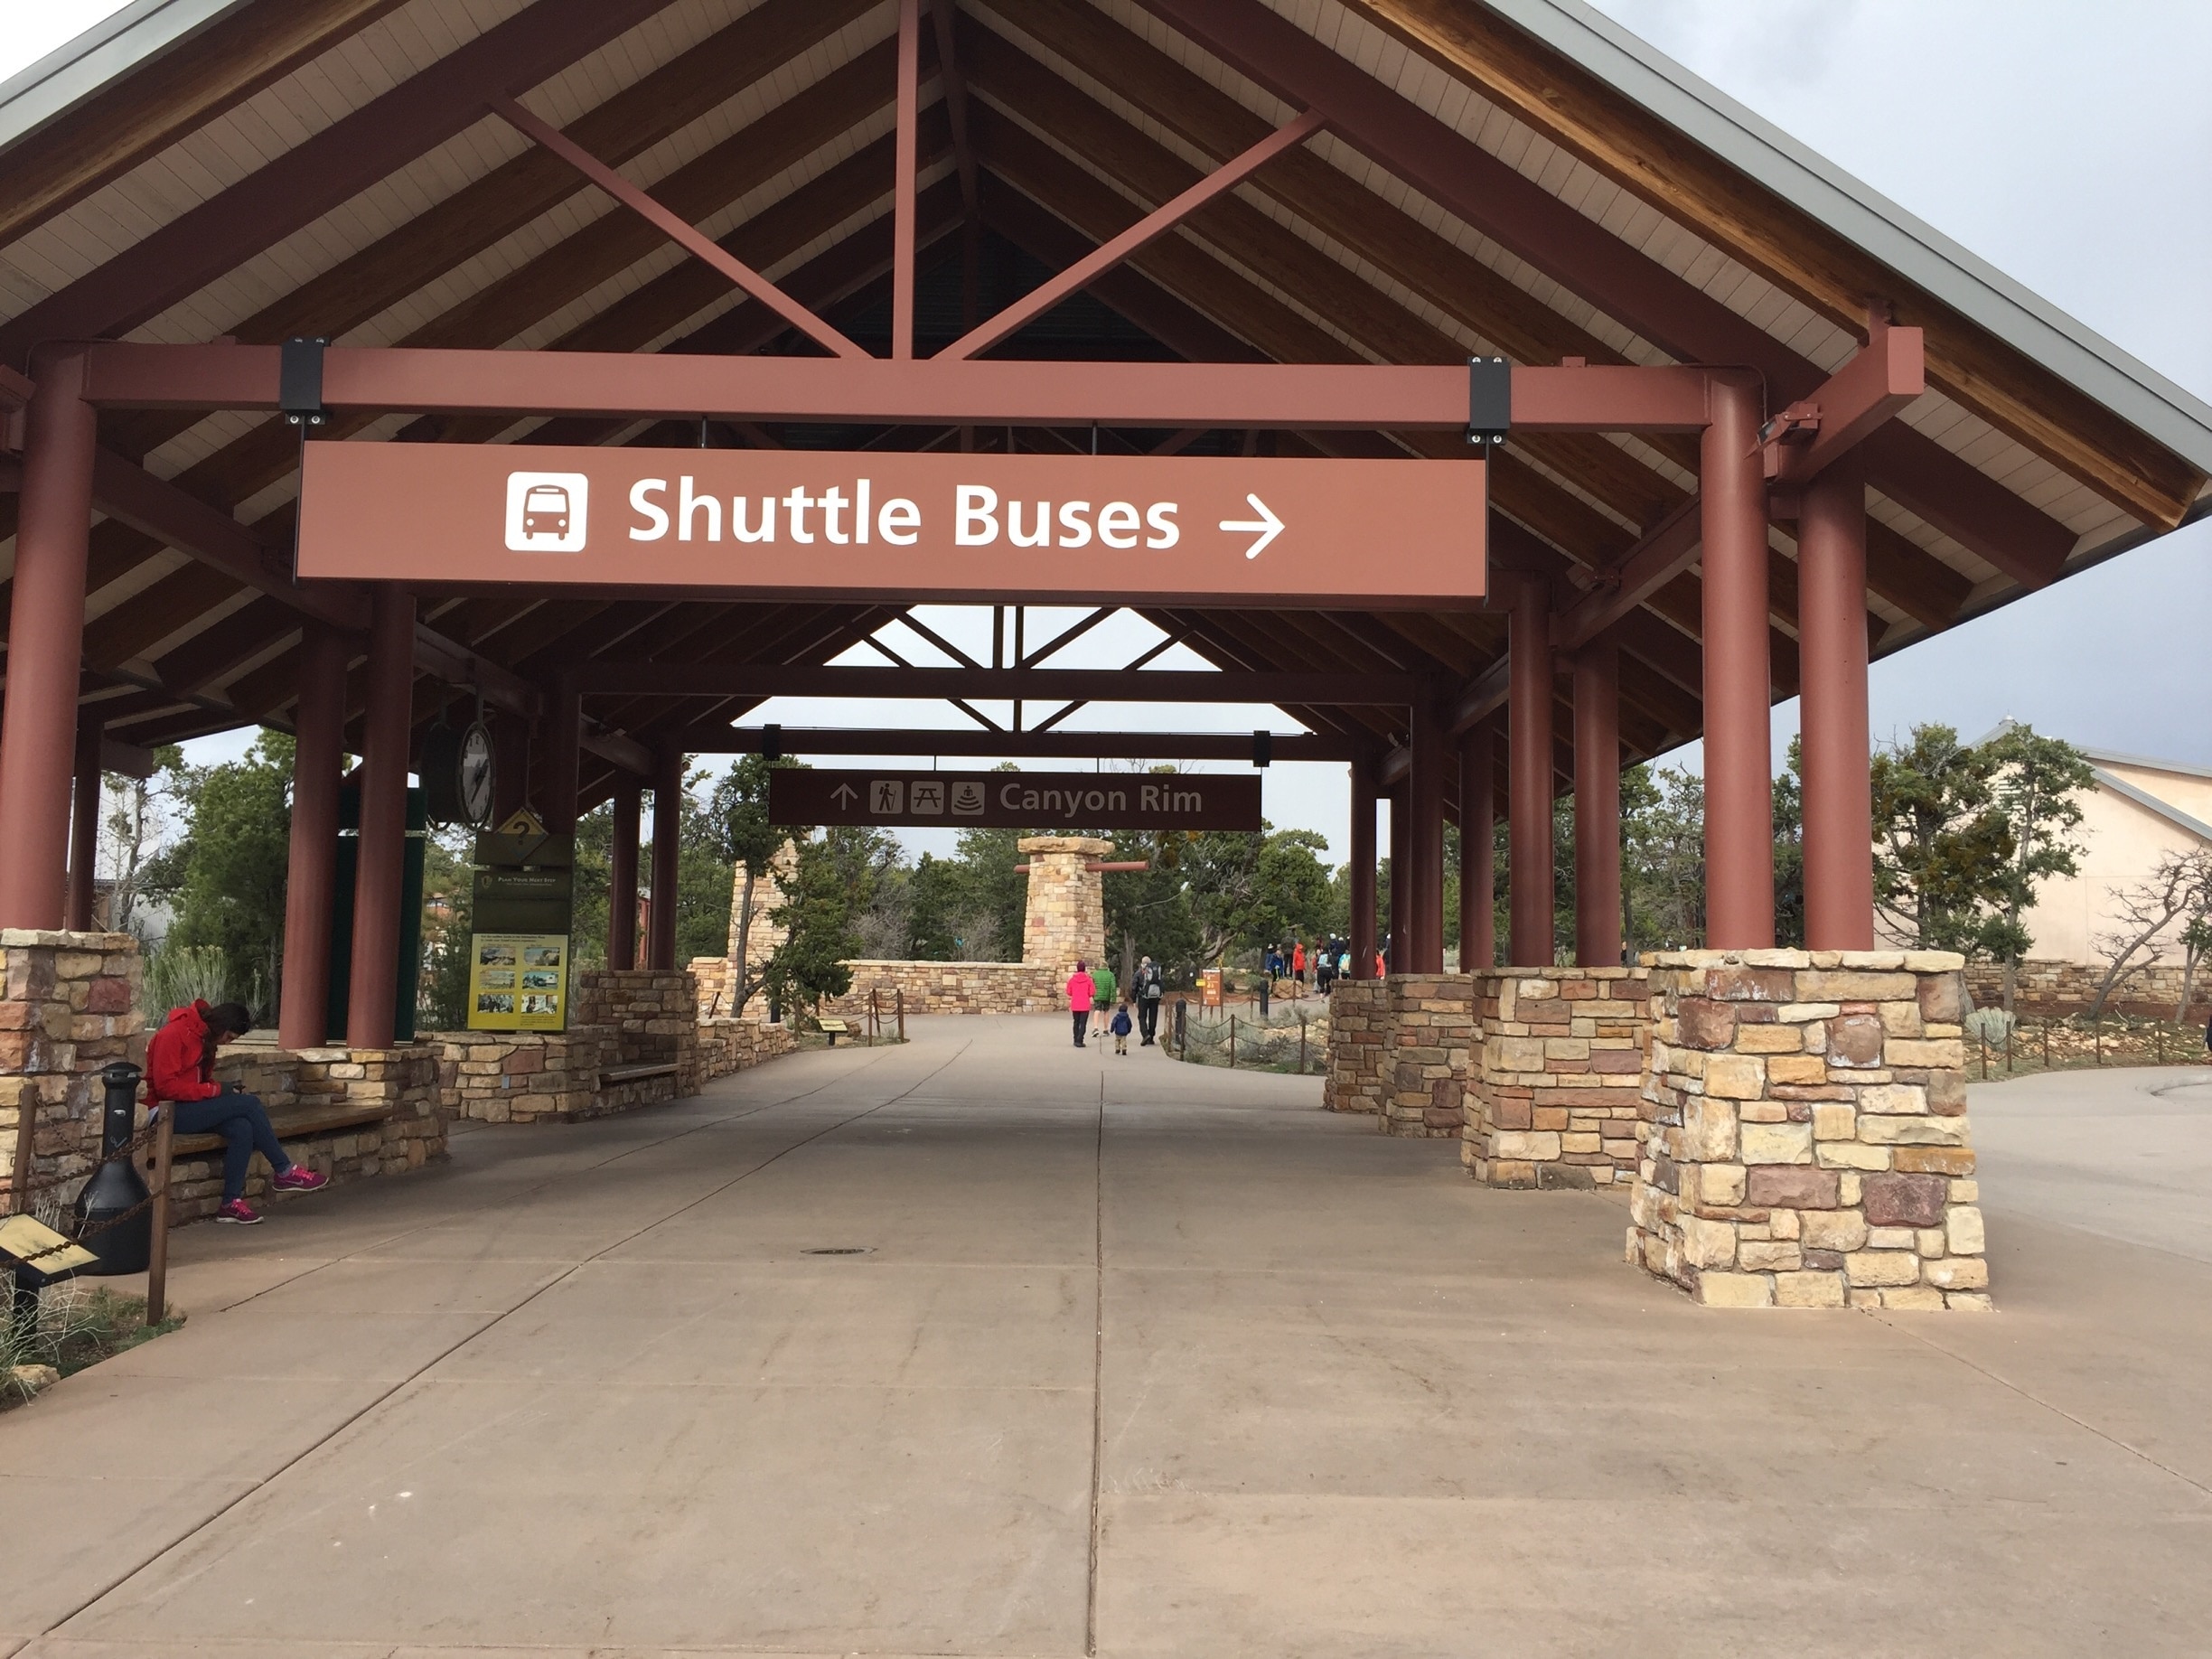 Shelter for taking the shuttle busses at grand canyon